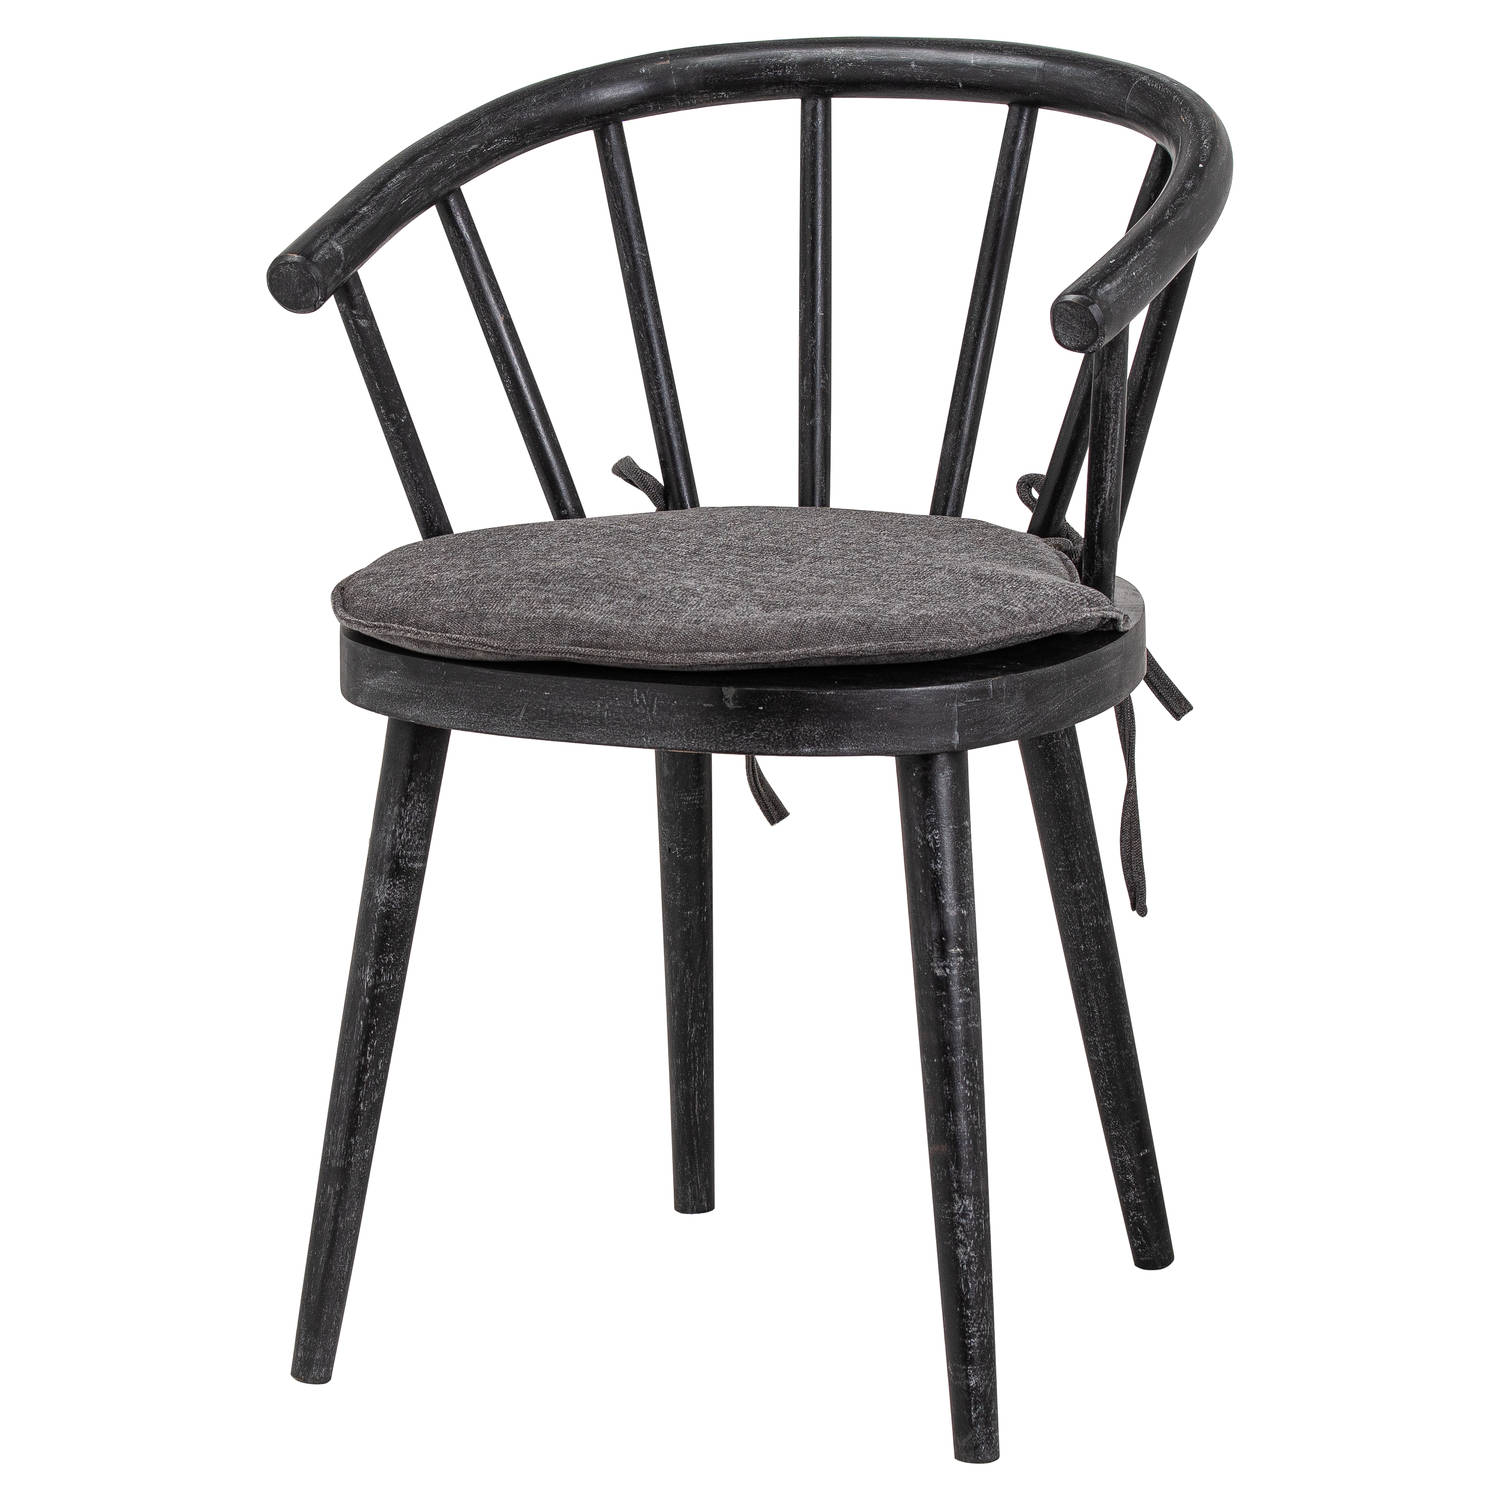 Nordic Collection Dining Chair - Image 1